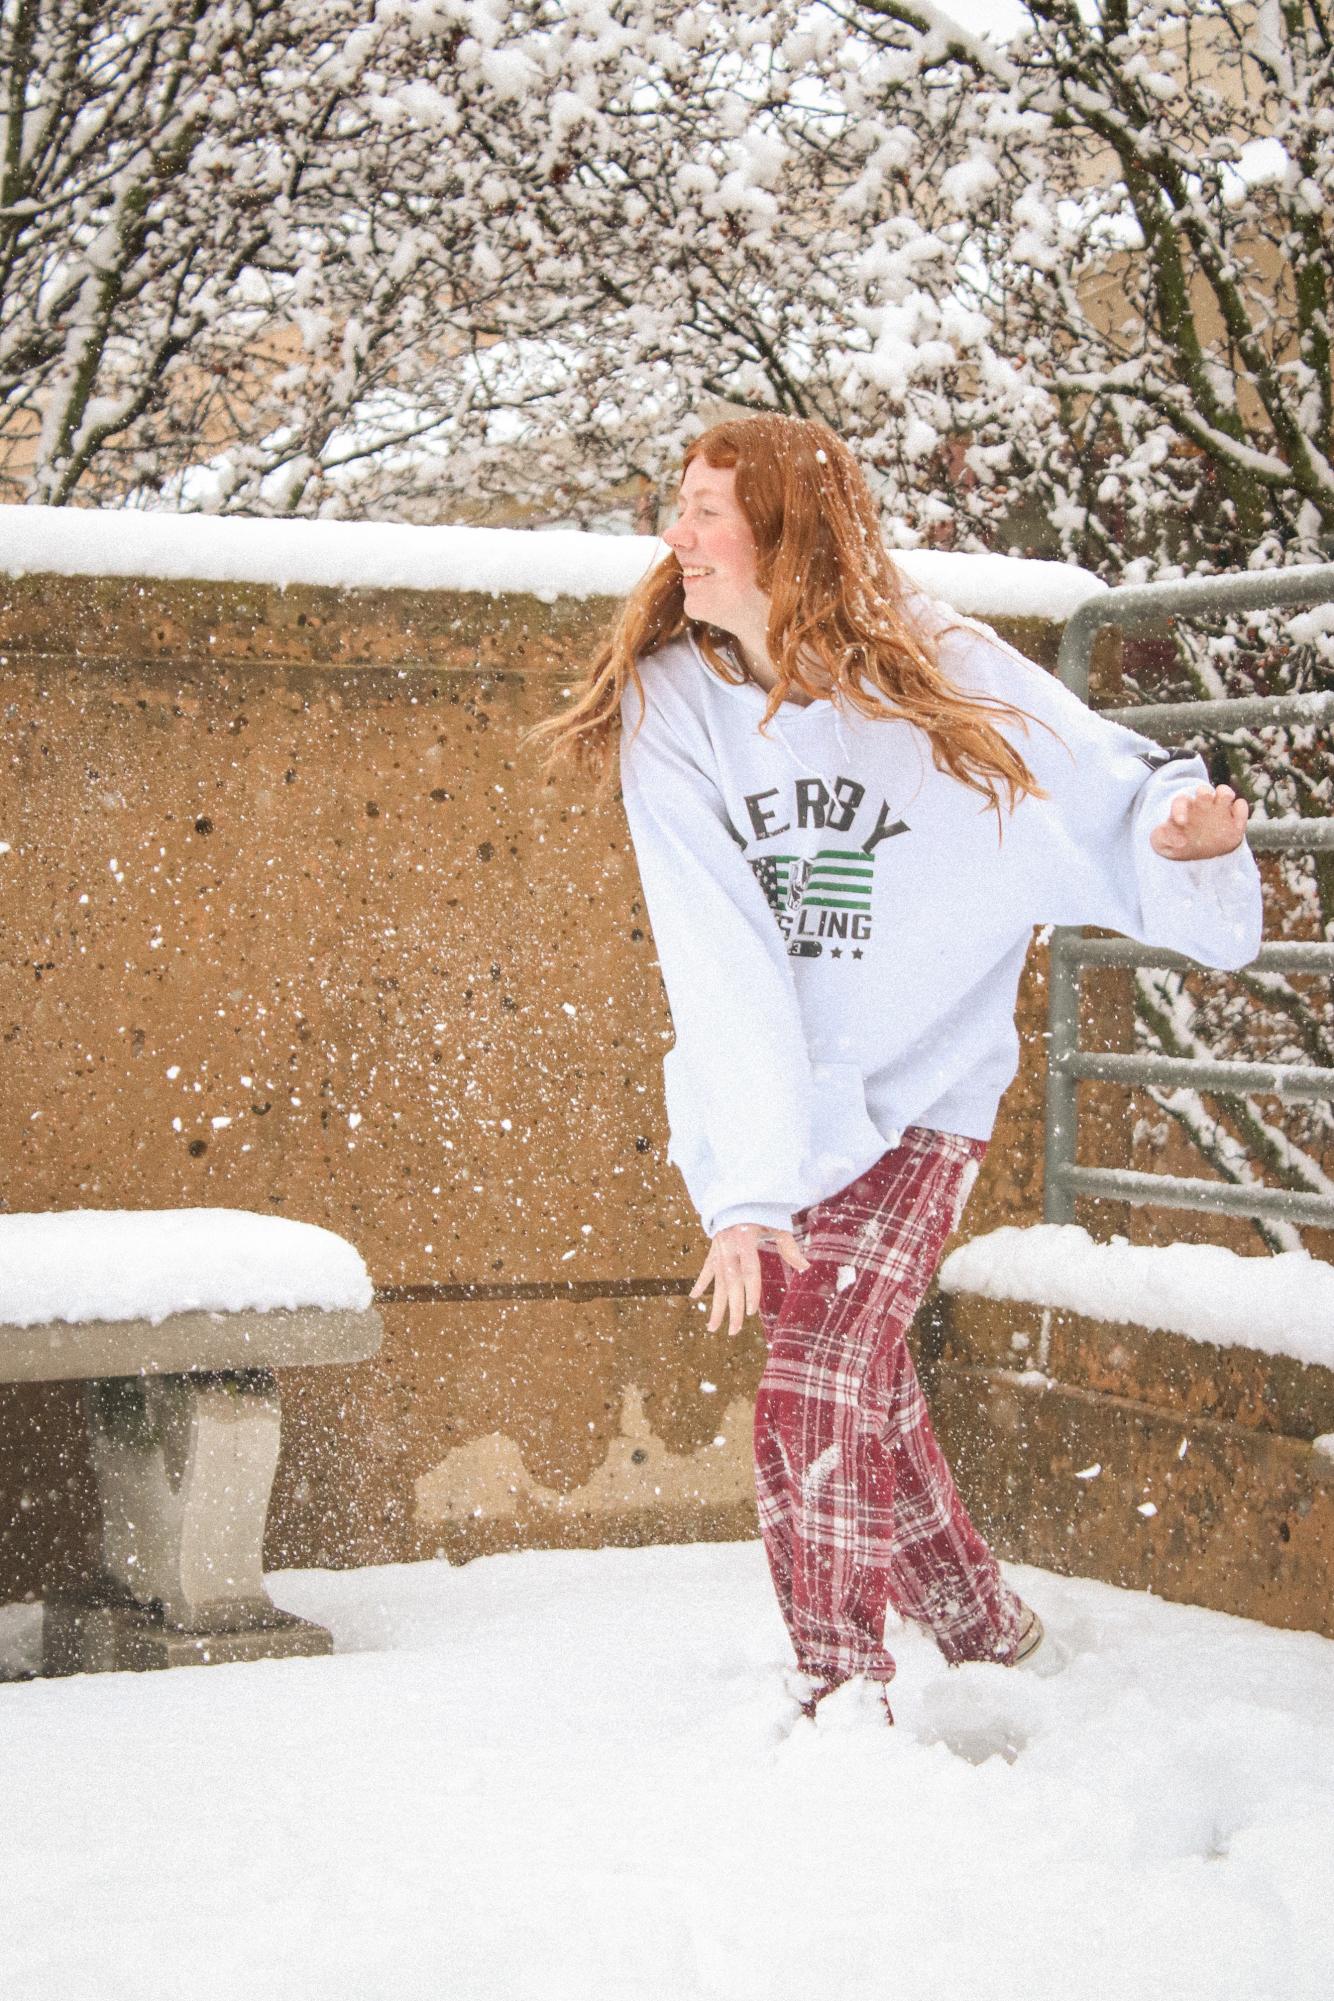 Students+playing+in+the+snow+%28Photos+by+Mikah+Herzberg%29